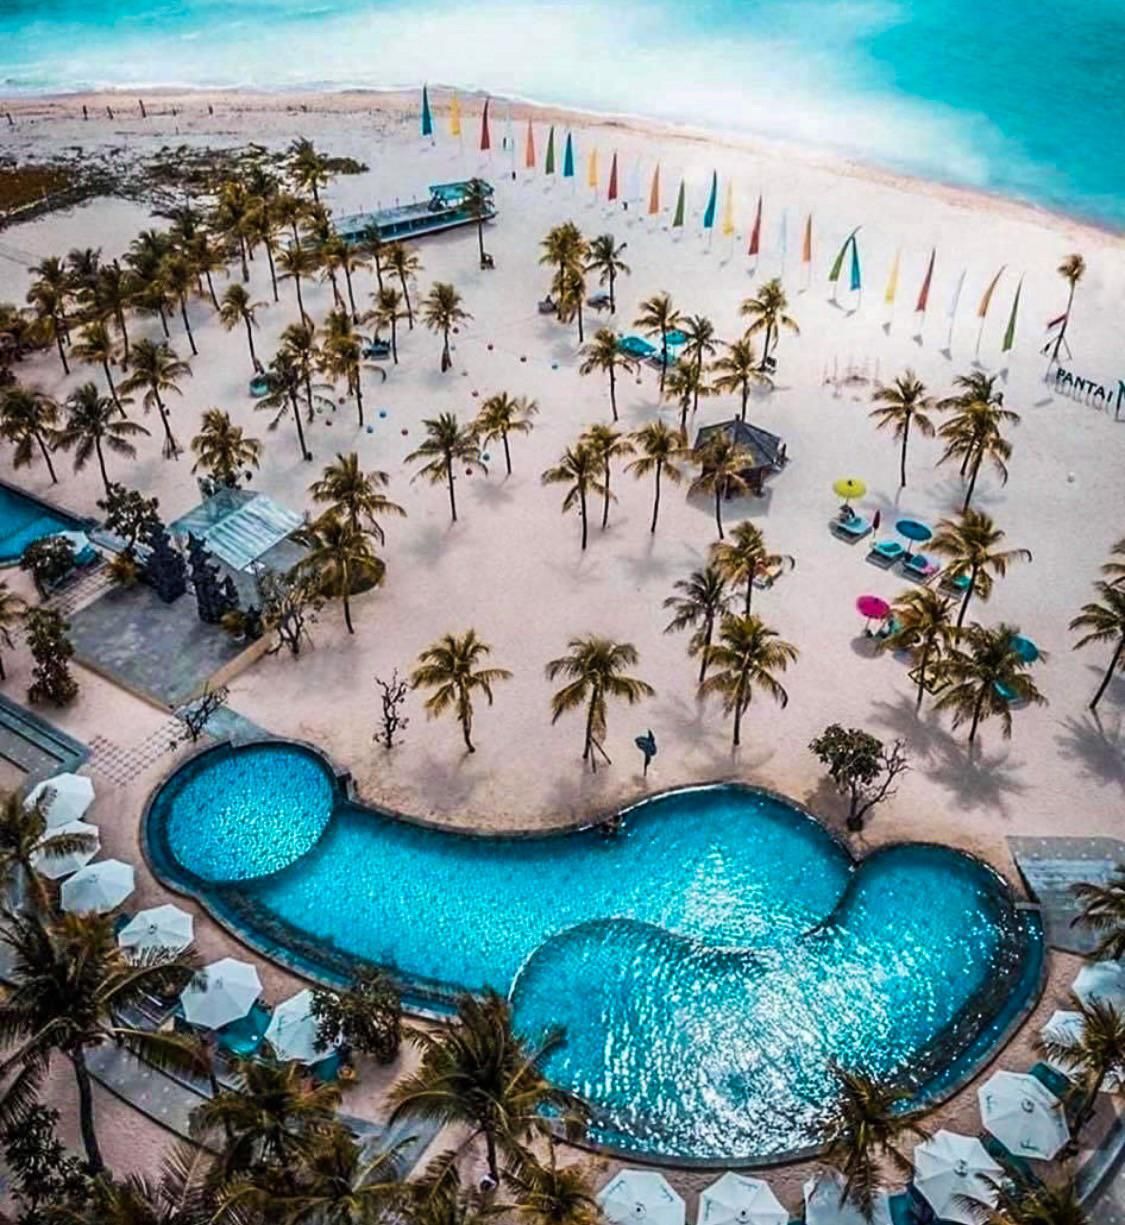 I have questions for the pool design team.